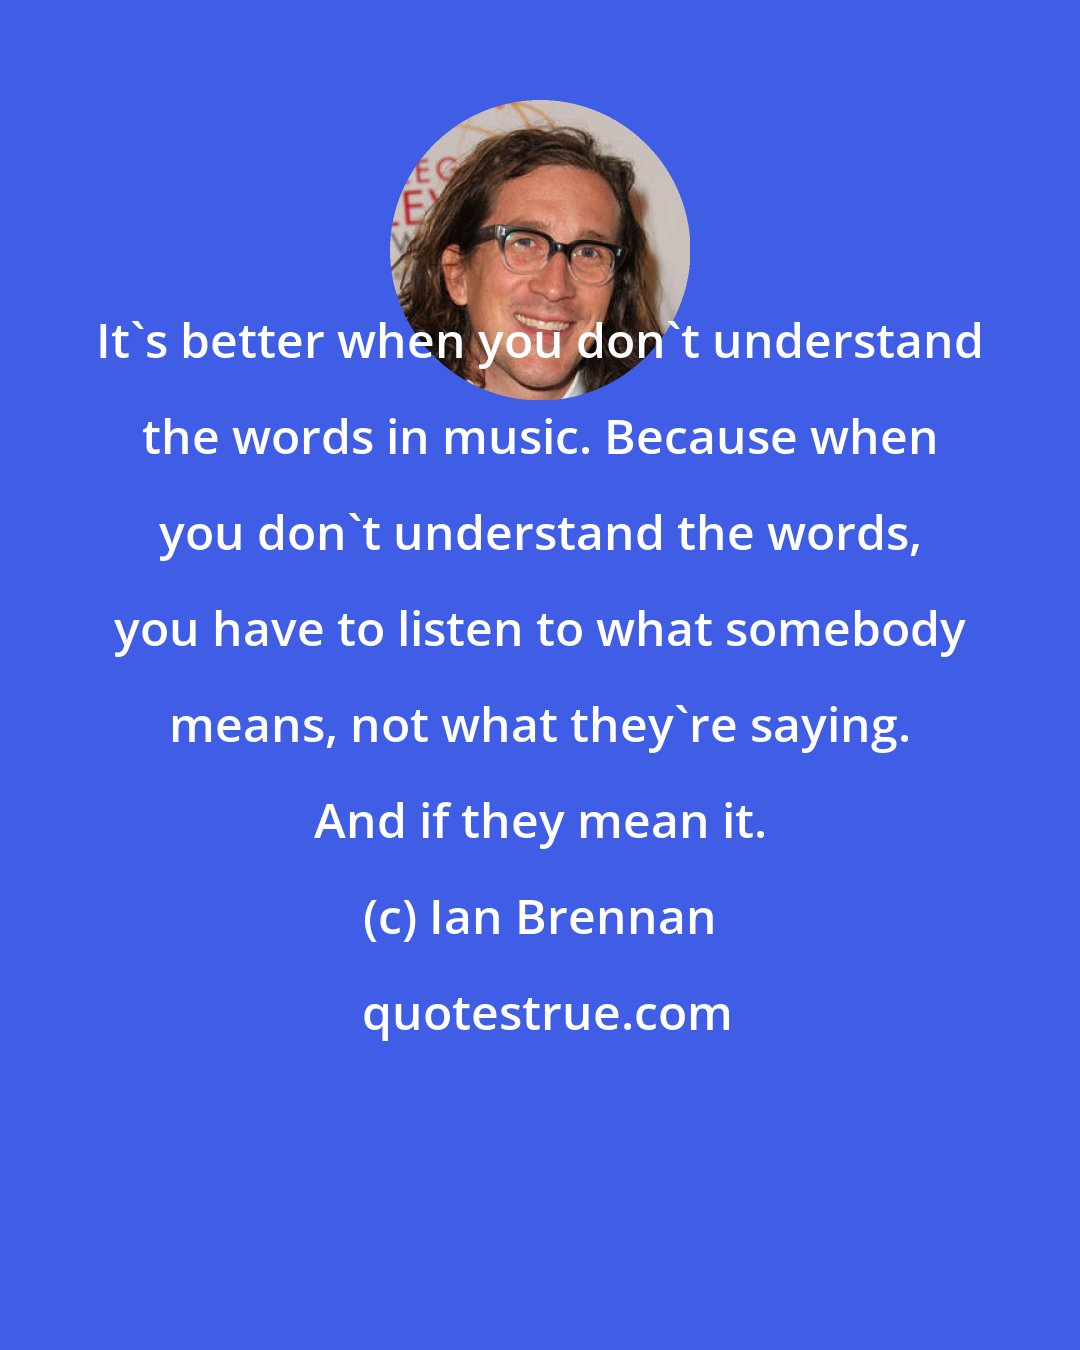 Ian Brennan: It's better when you don't understand the words in music. Because when you don't understand the words, you have to listen to what somebody means, not what they're saying. And if they mean it.